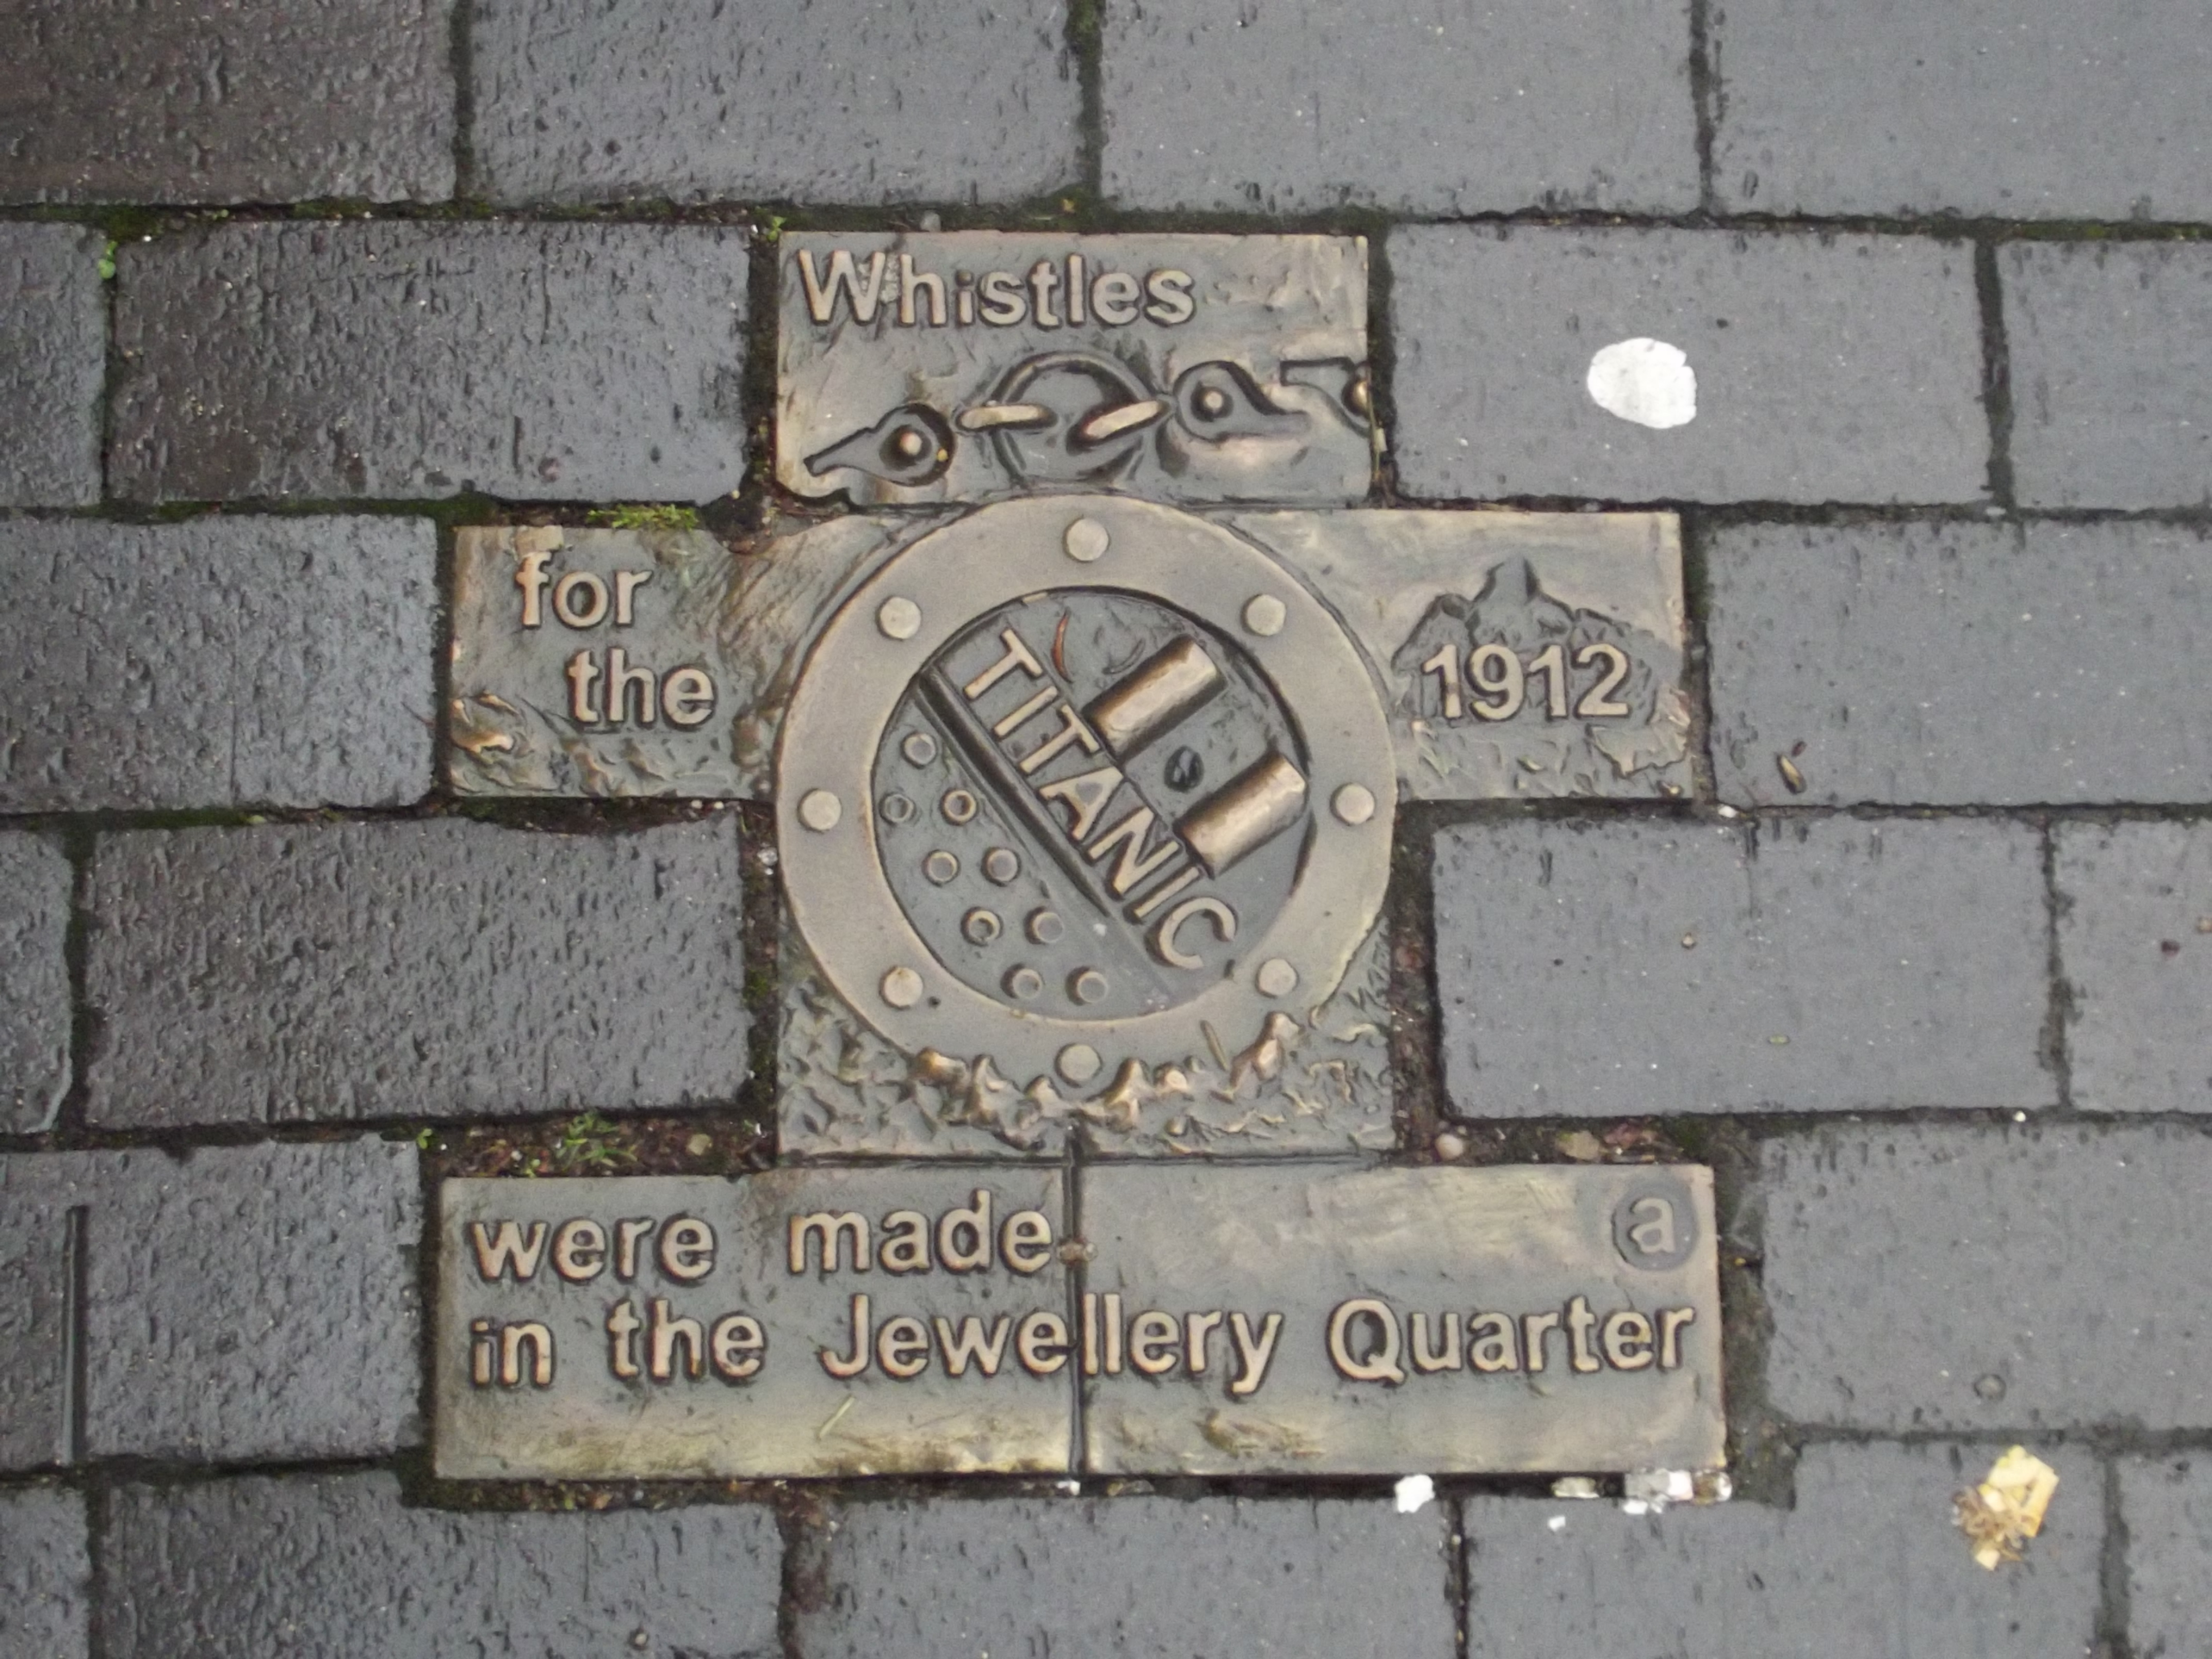 Charm Bracelet Trail - Jewellery Quarter - Newhall Hill - Whistles for the Titanic 1912 - were made in the Jewellery Quarter